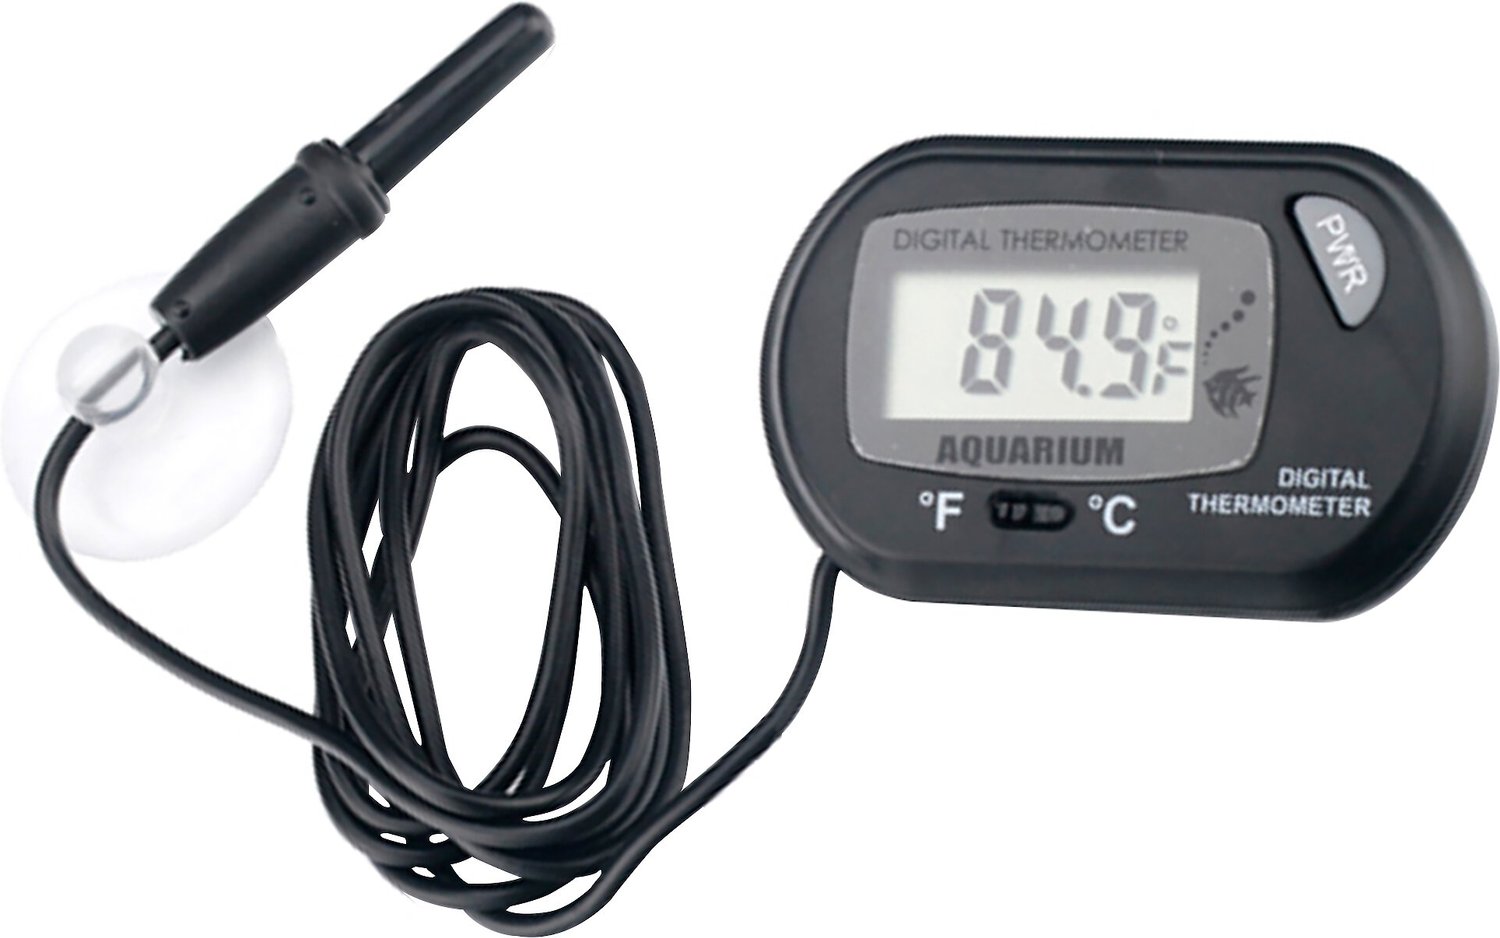 HITECHLIFE Digital Aquarium Thermometer LCD Fish Tank Thermometer Waterproof Accurate for Home Office and Aquarium